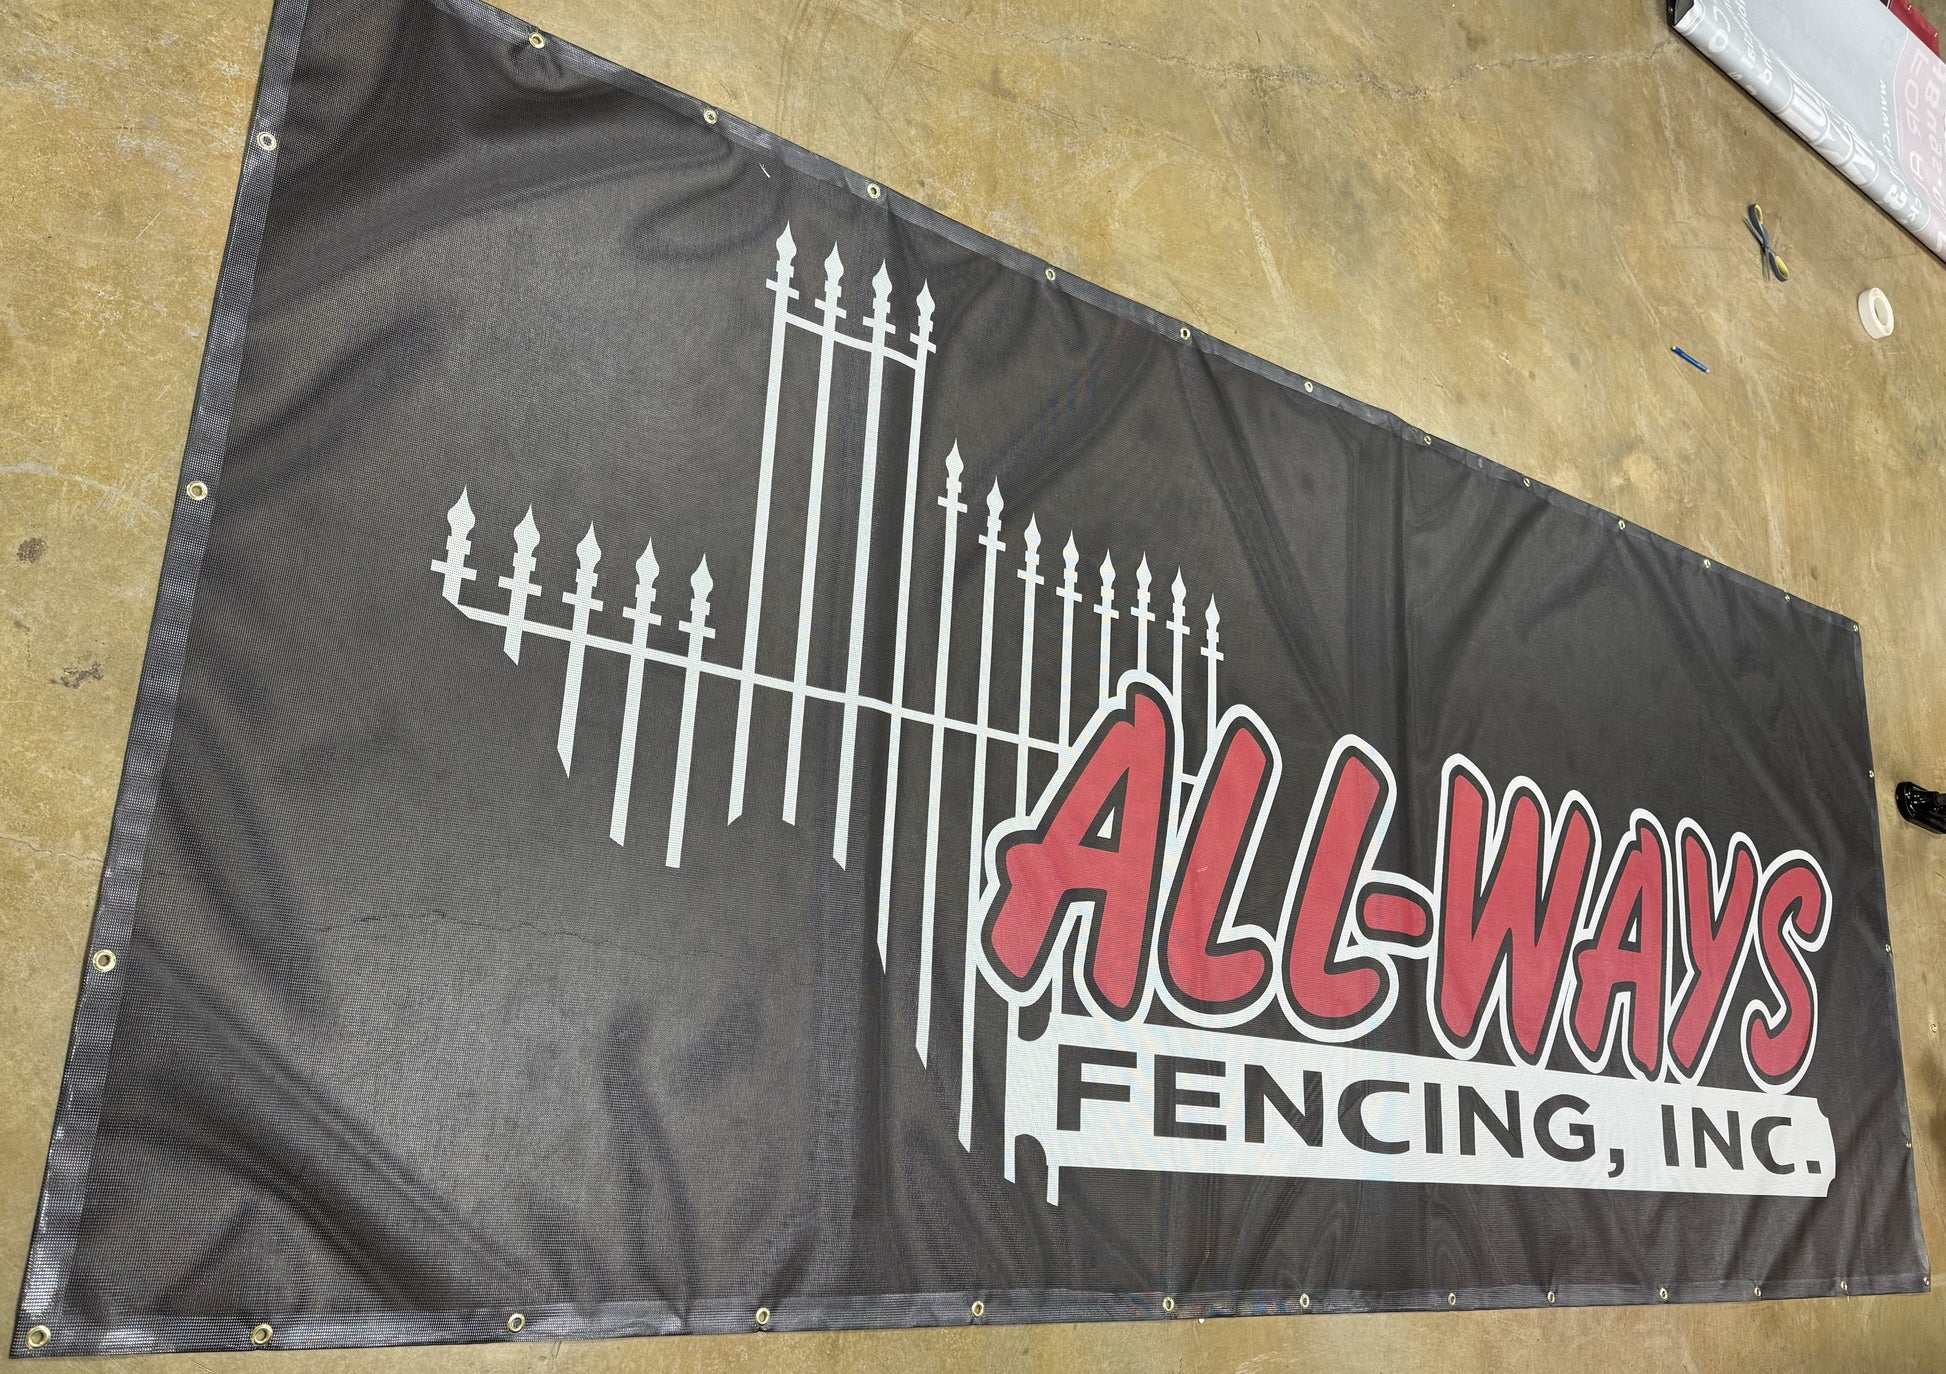 A large Show Off Your Threads custom mesh indoor/outdoor banner for "allways fencing, inc." featuring a stylized white fence design on a dark background, displayed on a workshop floor with visible tools.